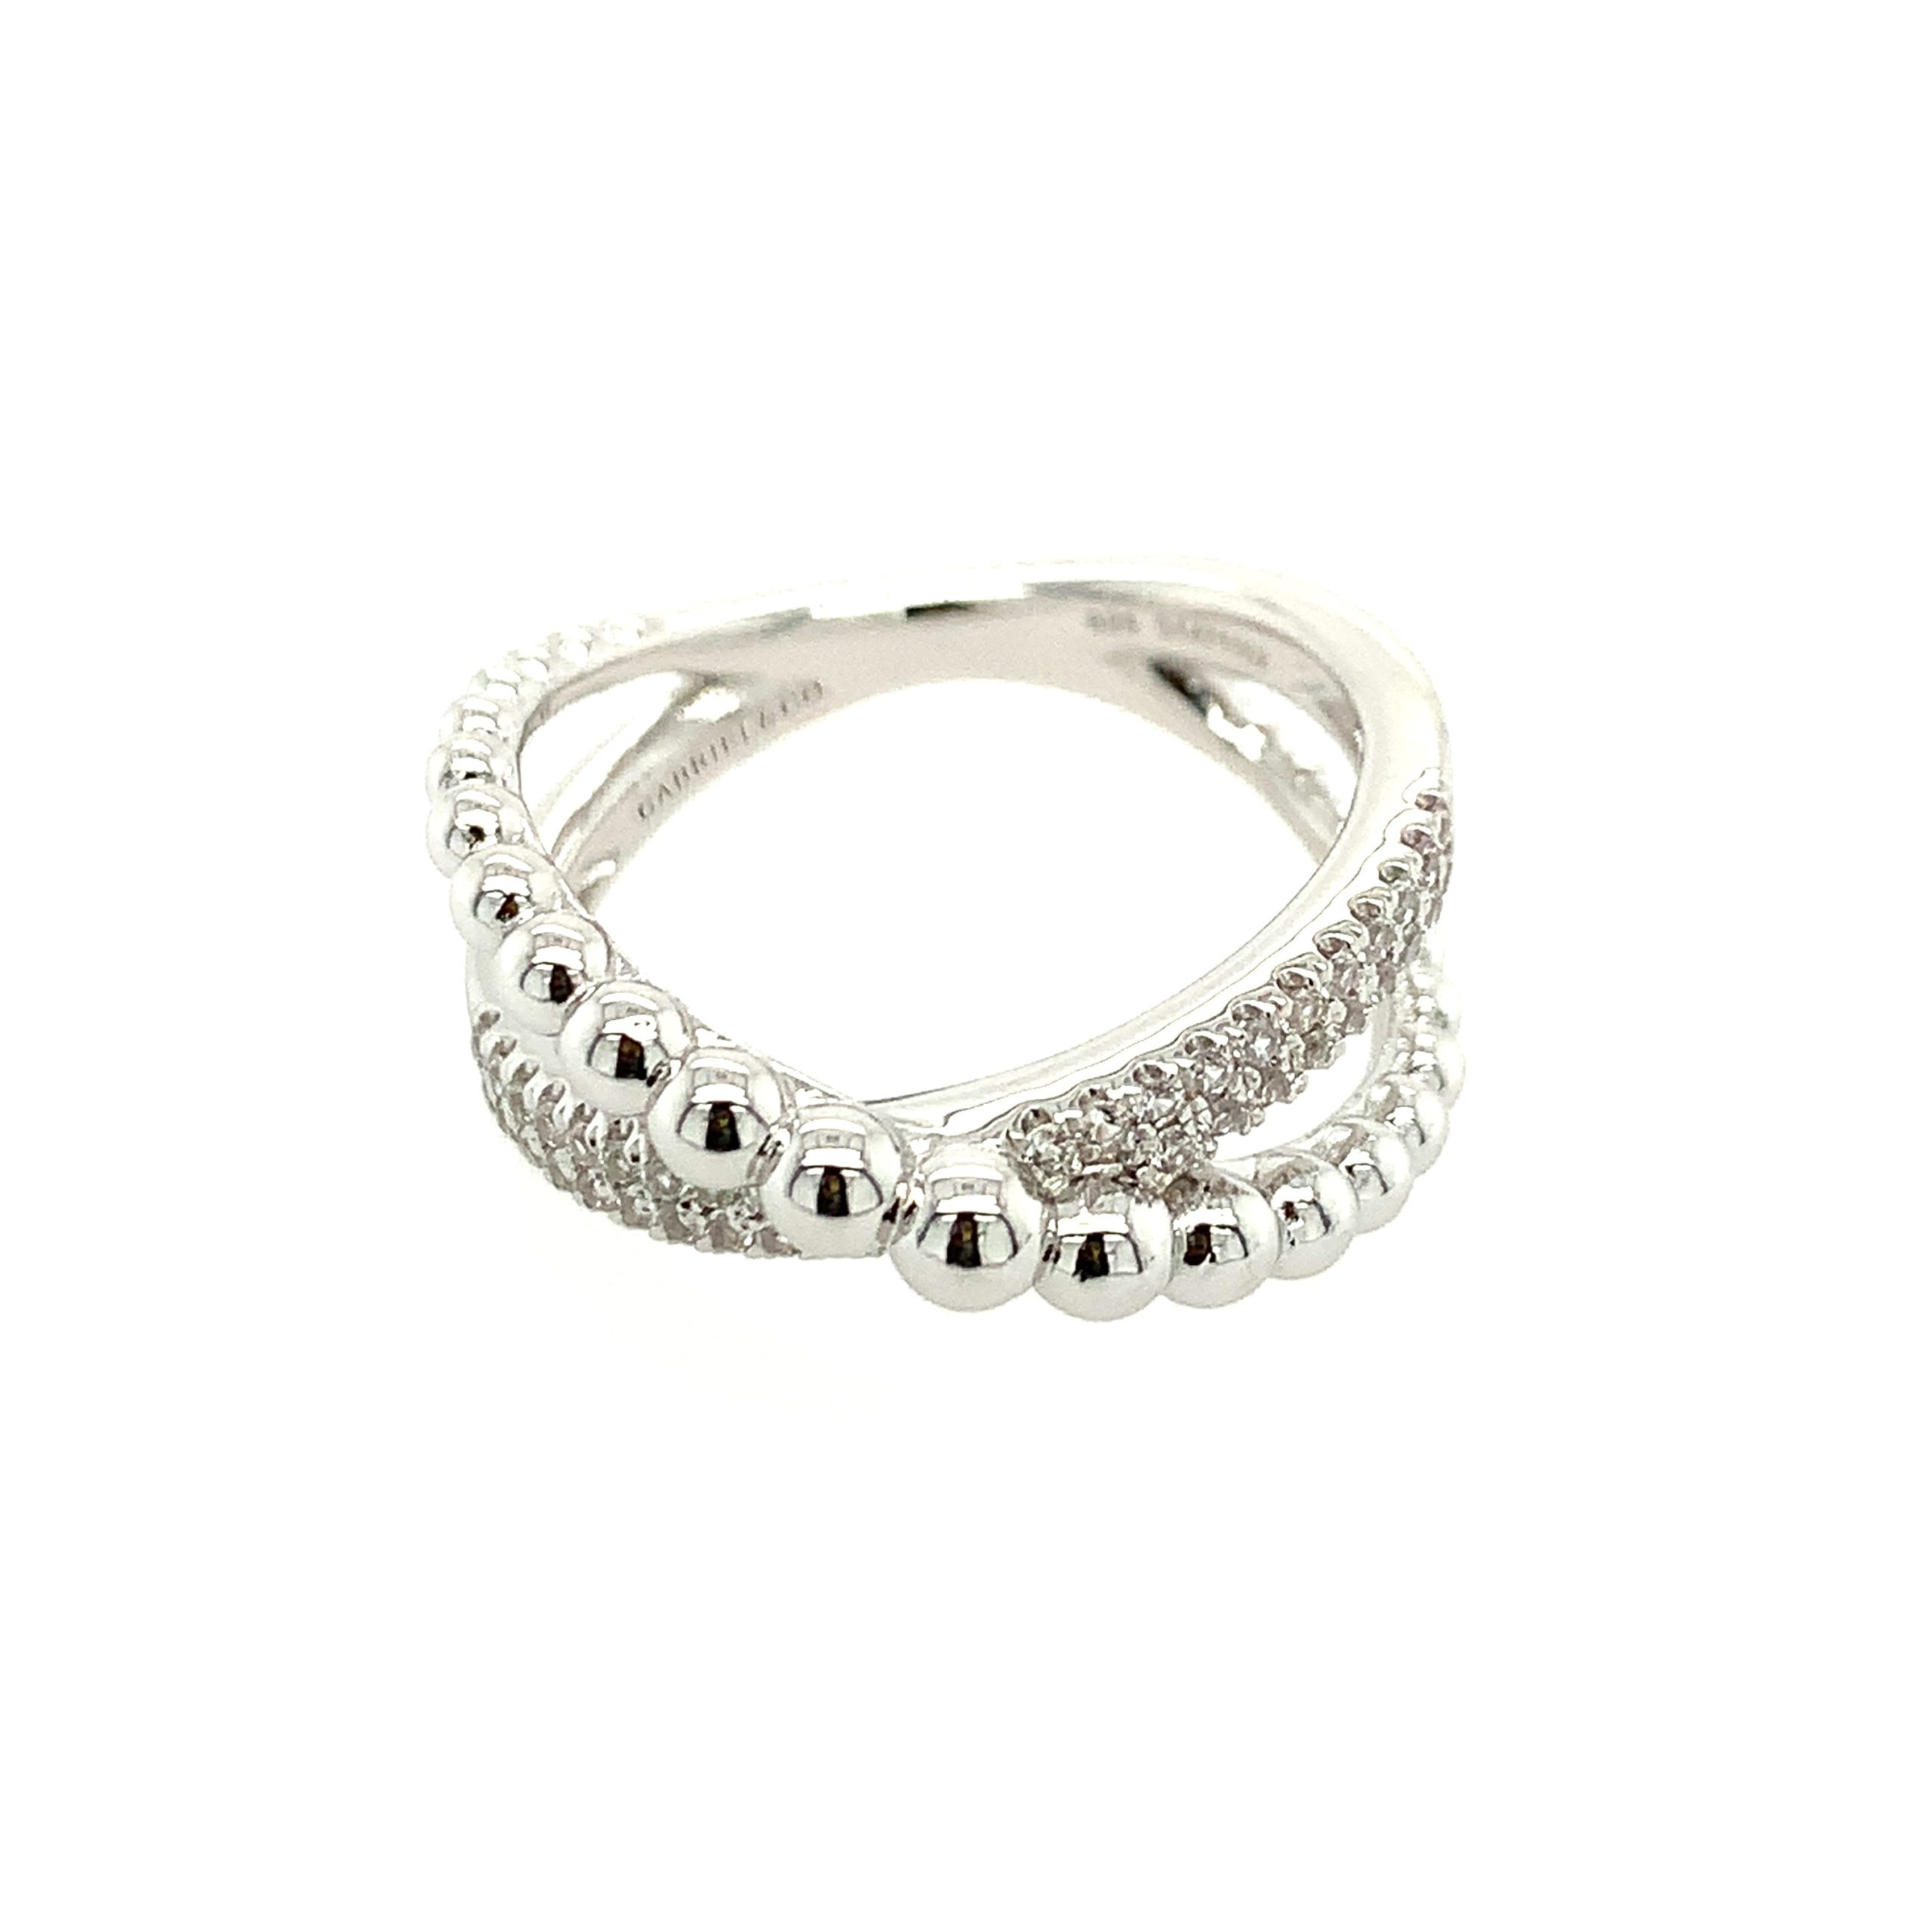 Sterling Silver White Sapphire Ring